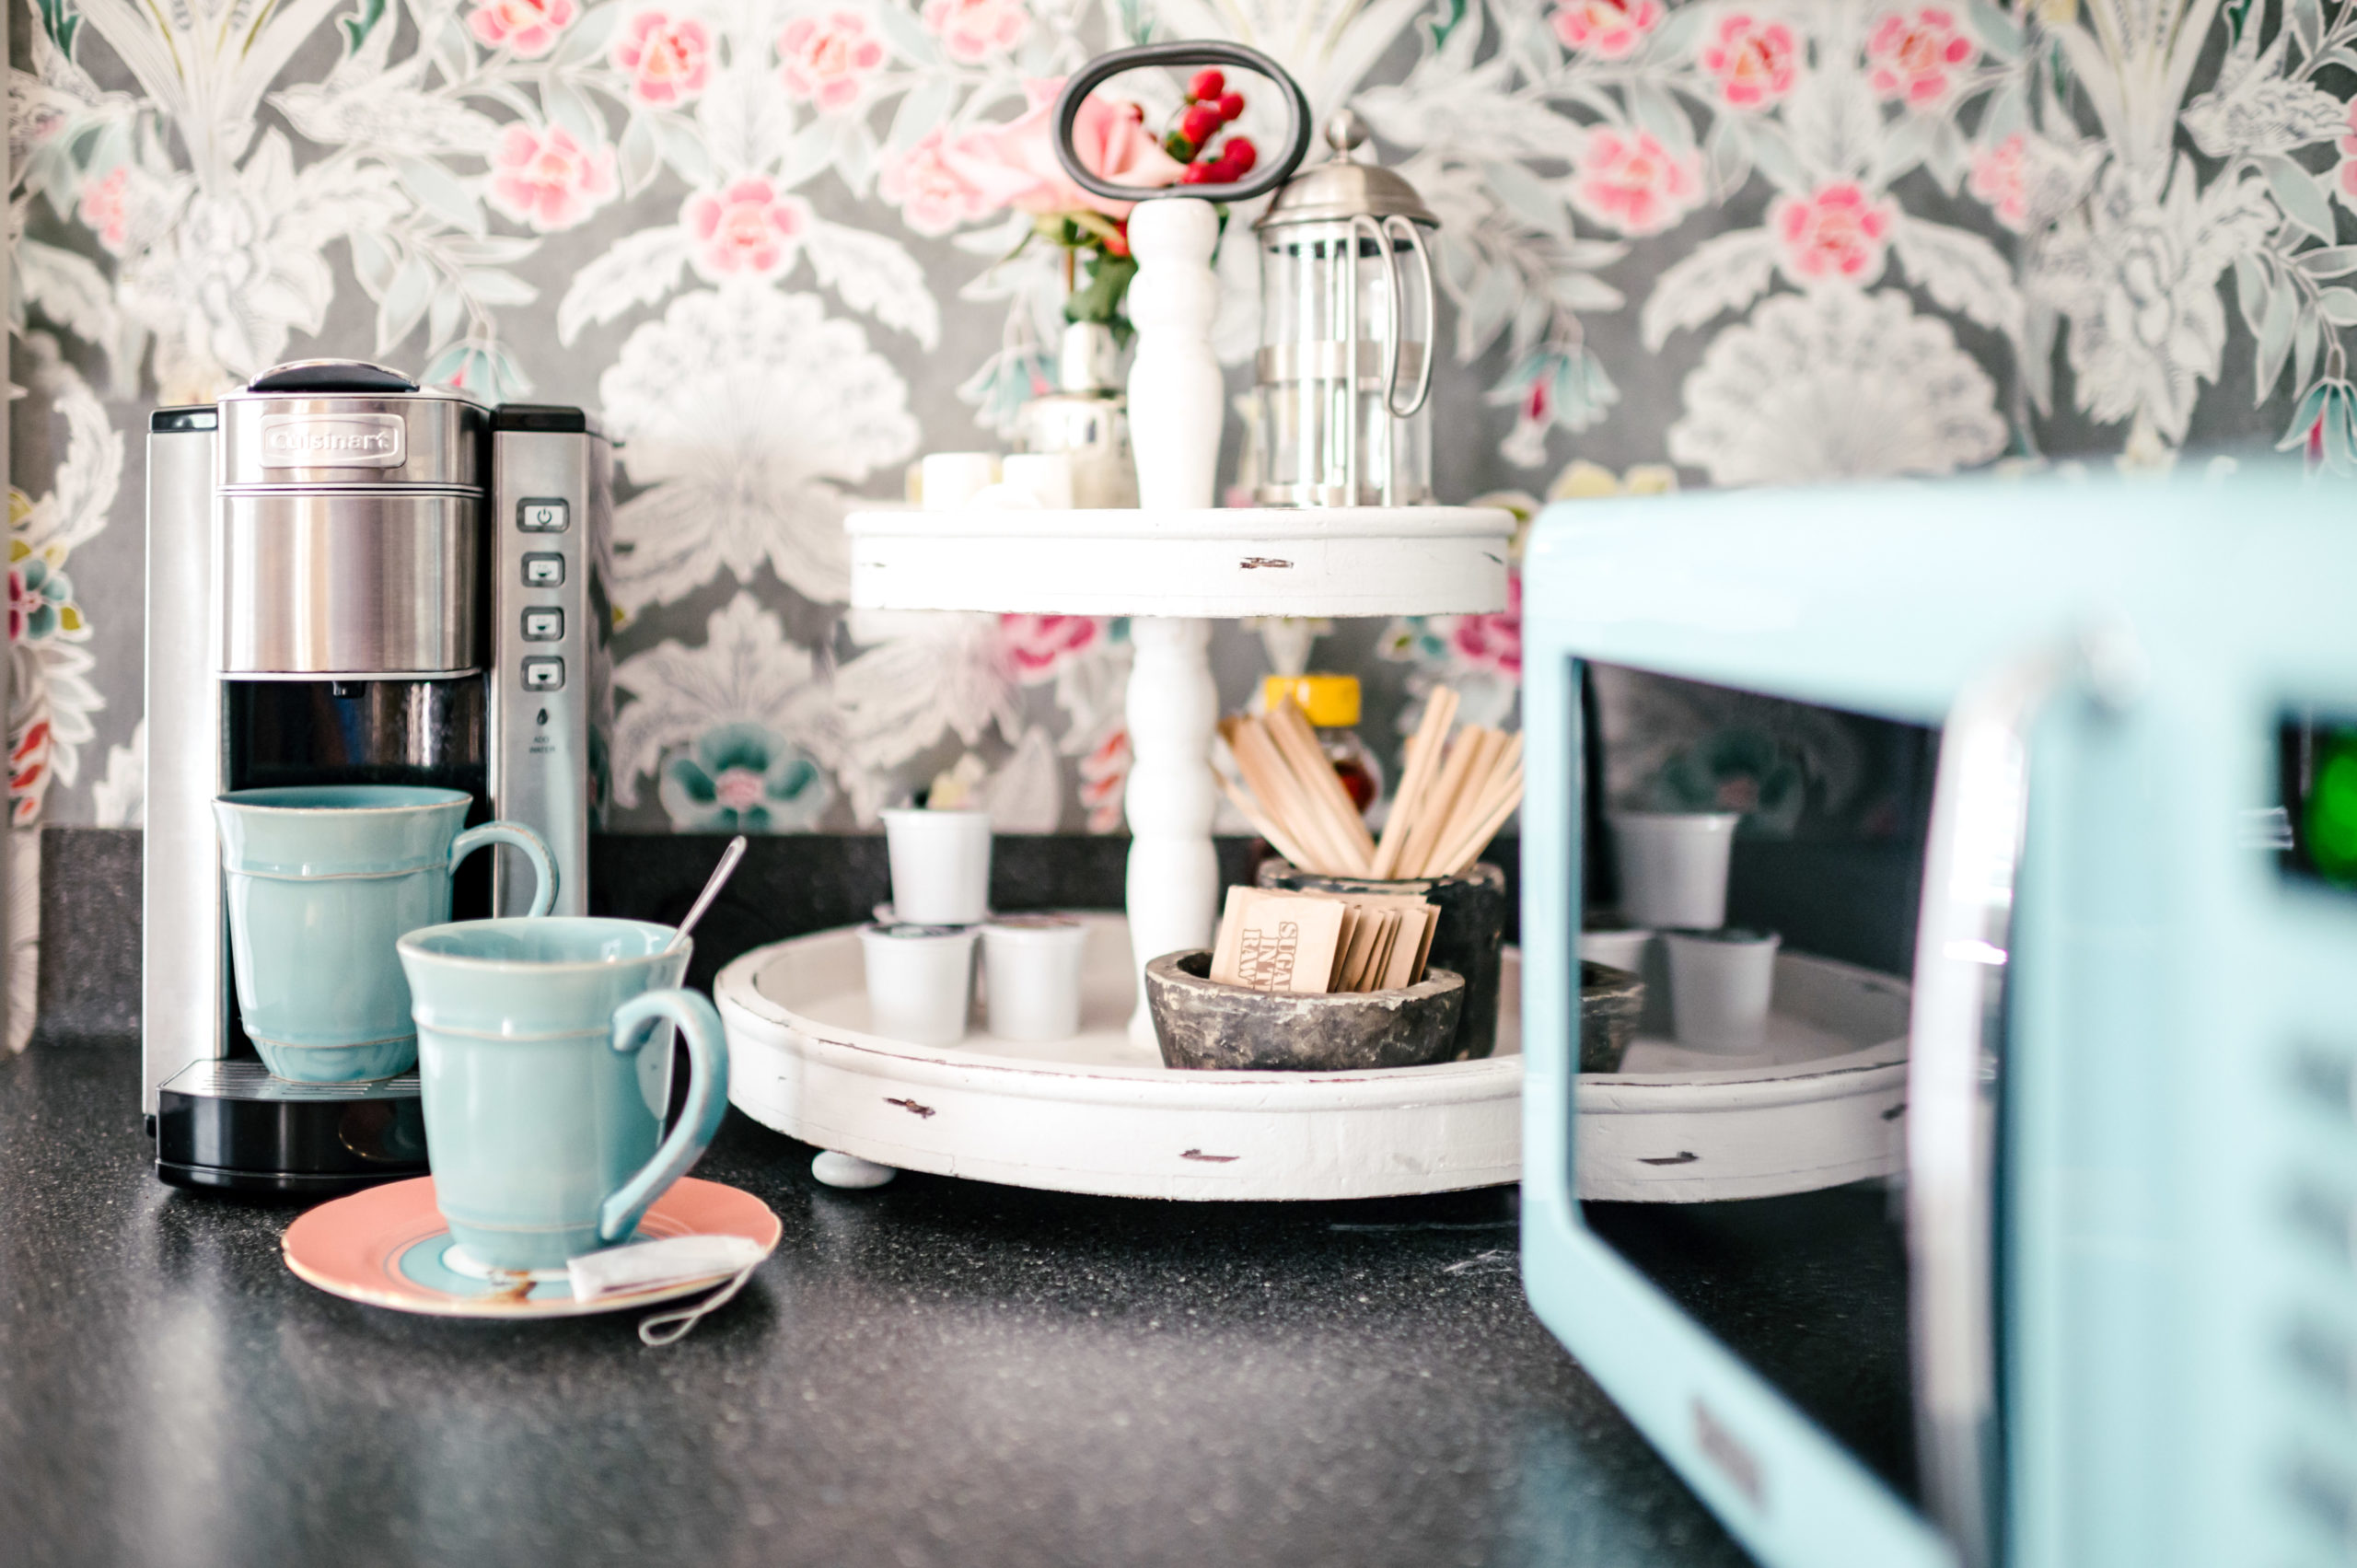 Kitchen counter with coffee maker and coffee essentials